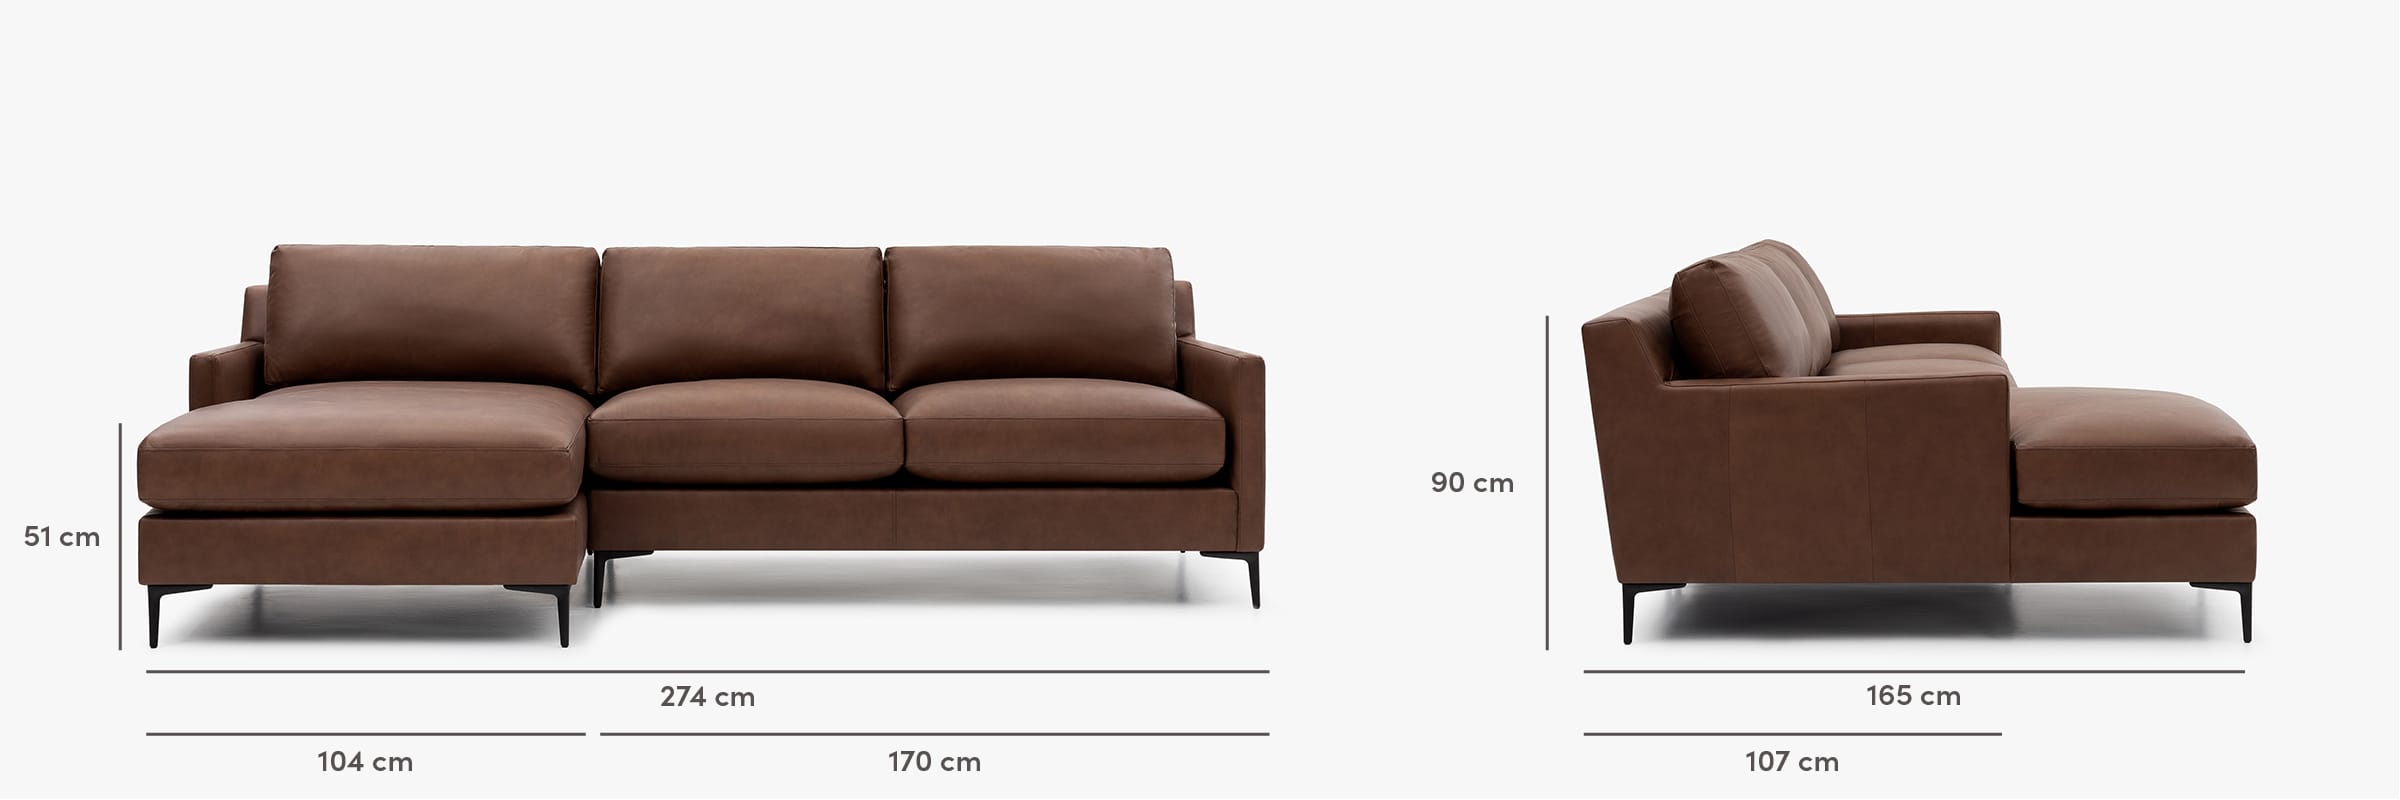 Kennedy sectional leather sofa dimensions